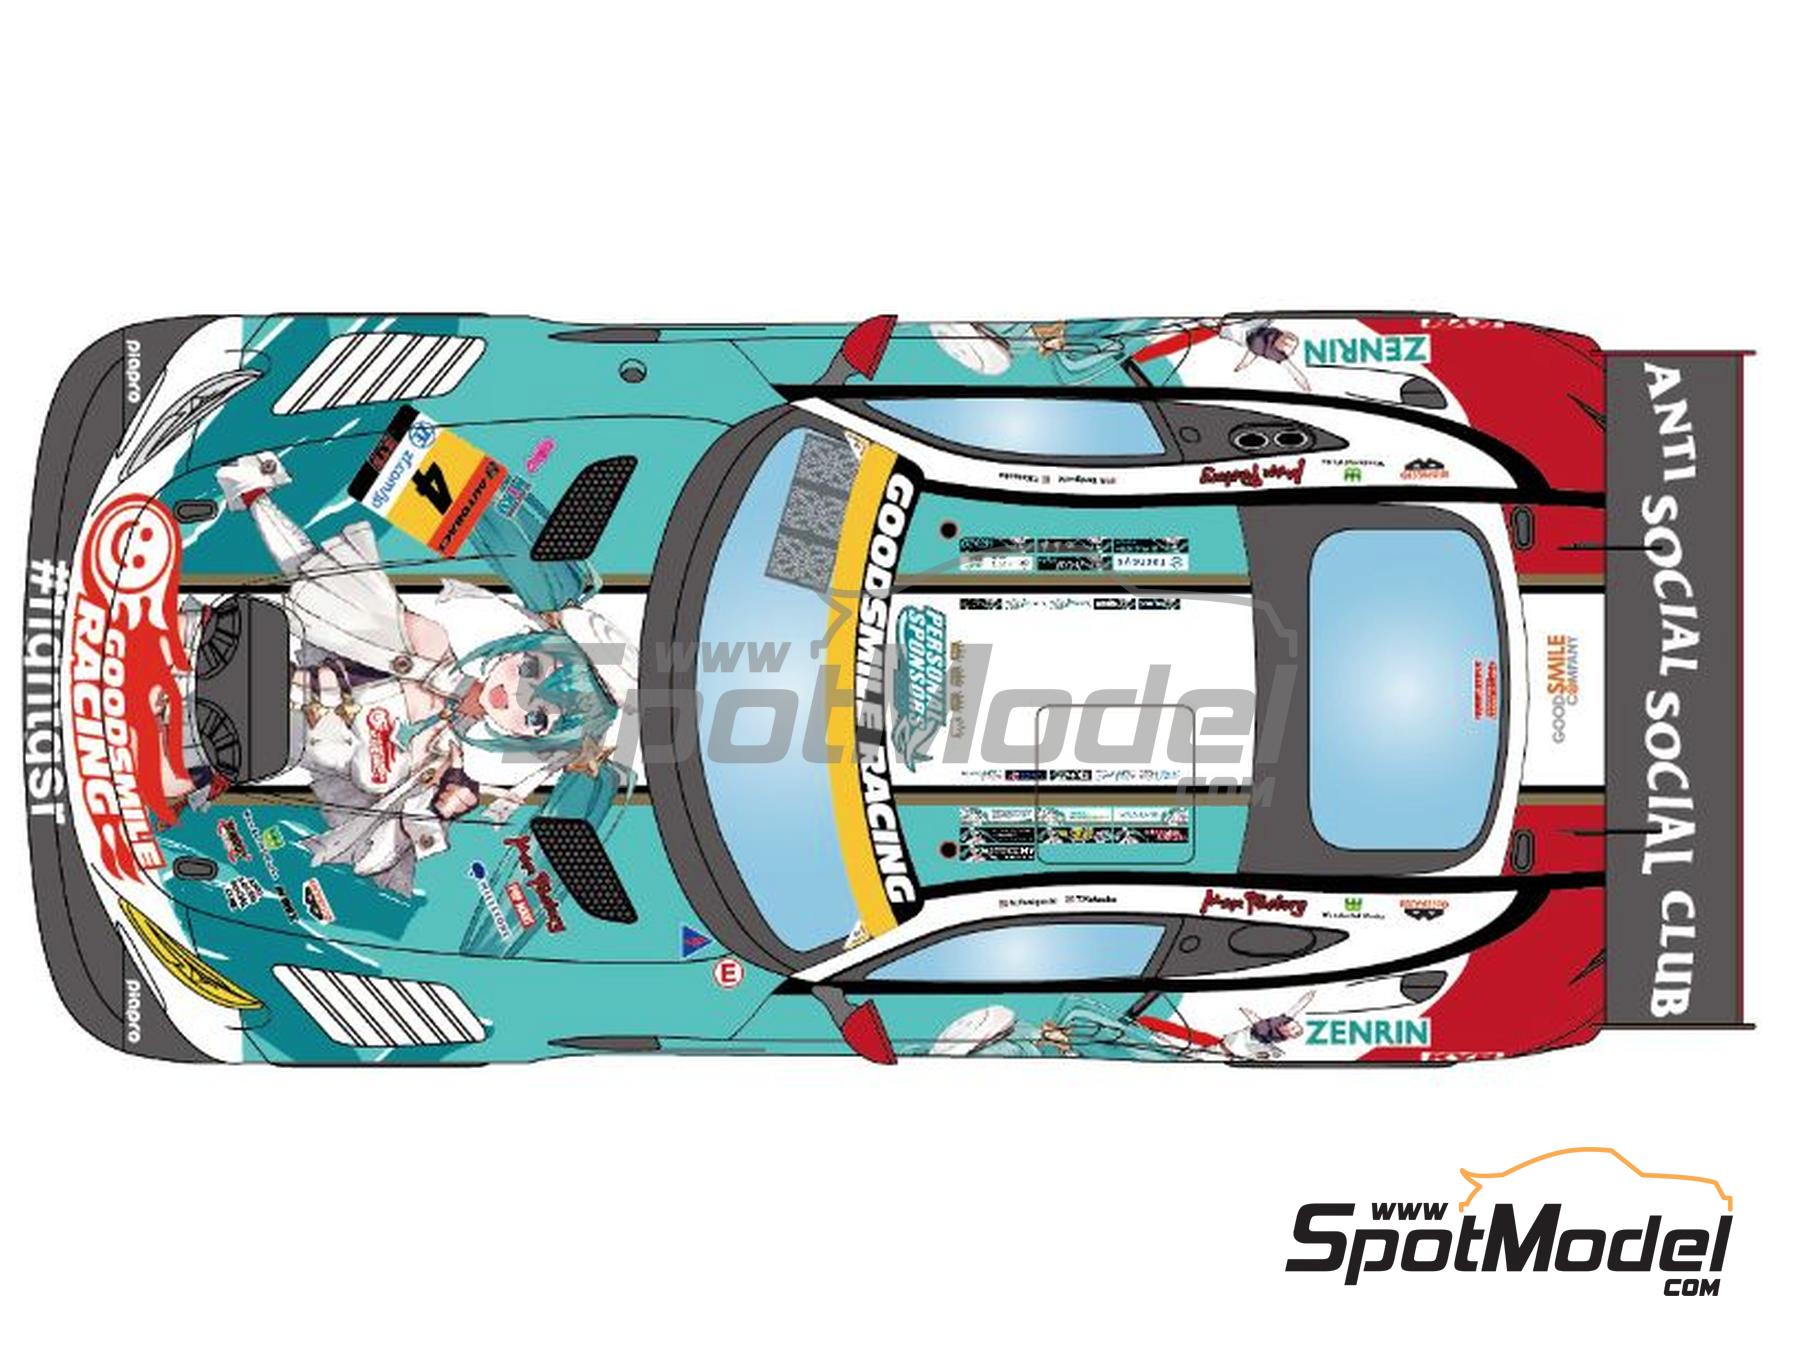 Mercedes Benz AMG GT3 Evo Goodsmile Racing Team sponsored by Hatsune Miku -  Autobacs Super GT Series 2023. Marking / livery in 1/24 scale manufactured